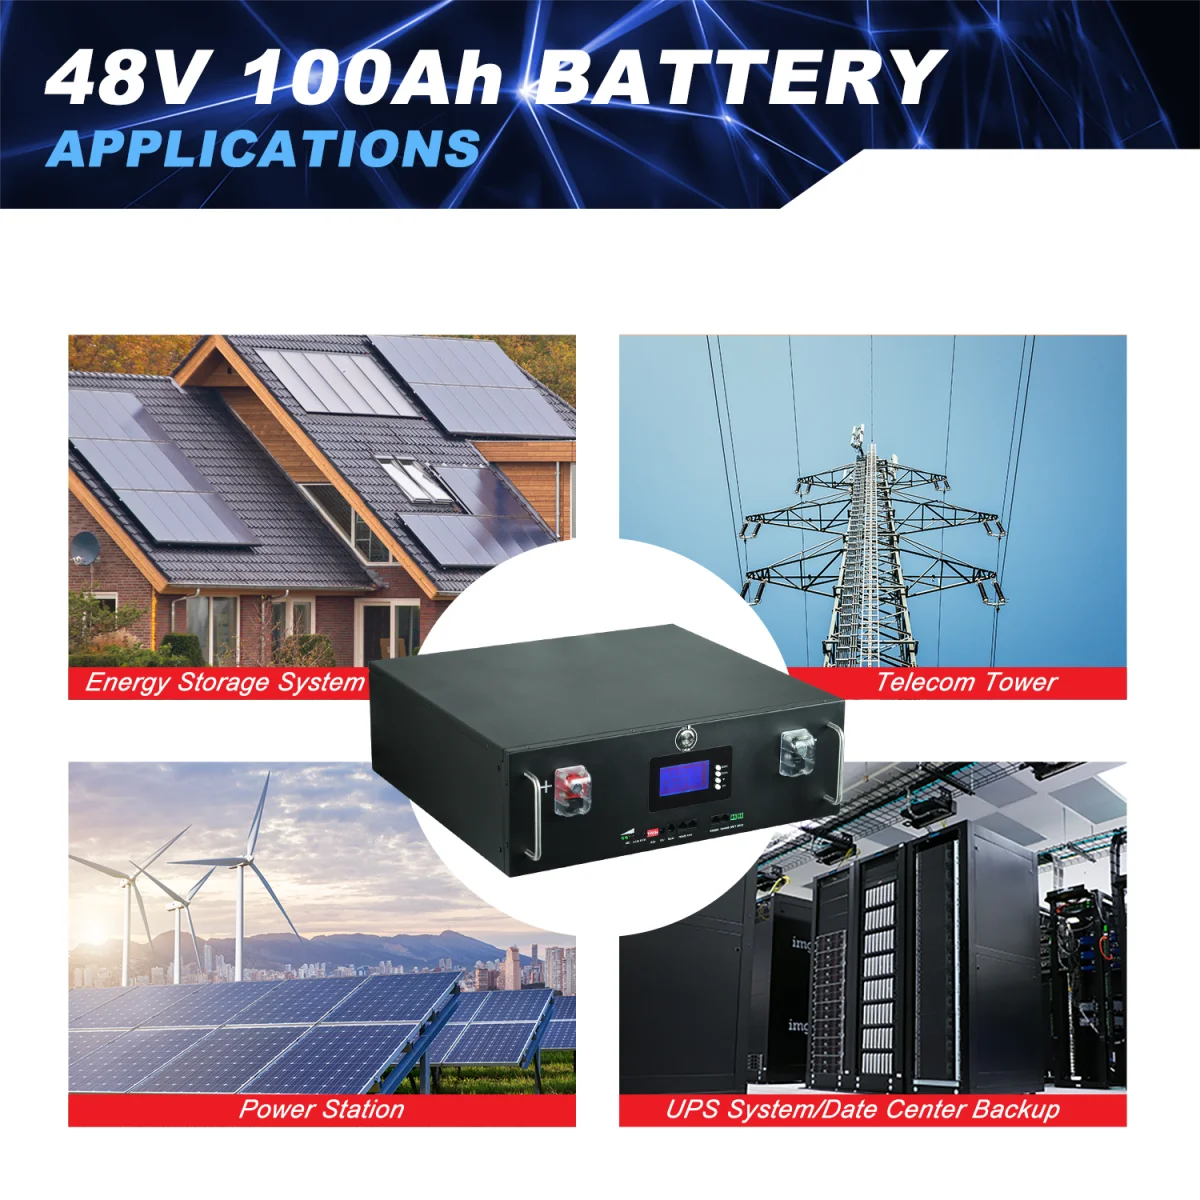 48V 100Ah 200Ah Lifepo4 Battery, Lithium-ion battery pack for energy storage, telecom towers, UPS, and data centers.